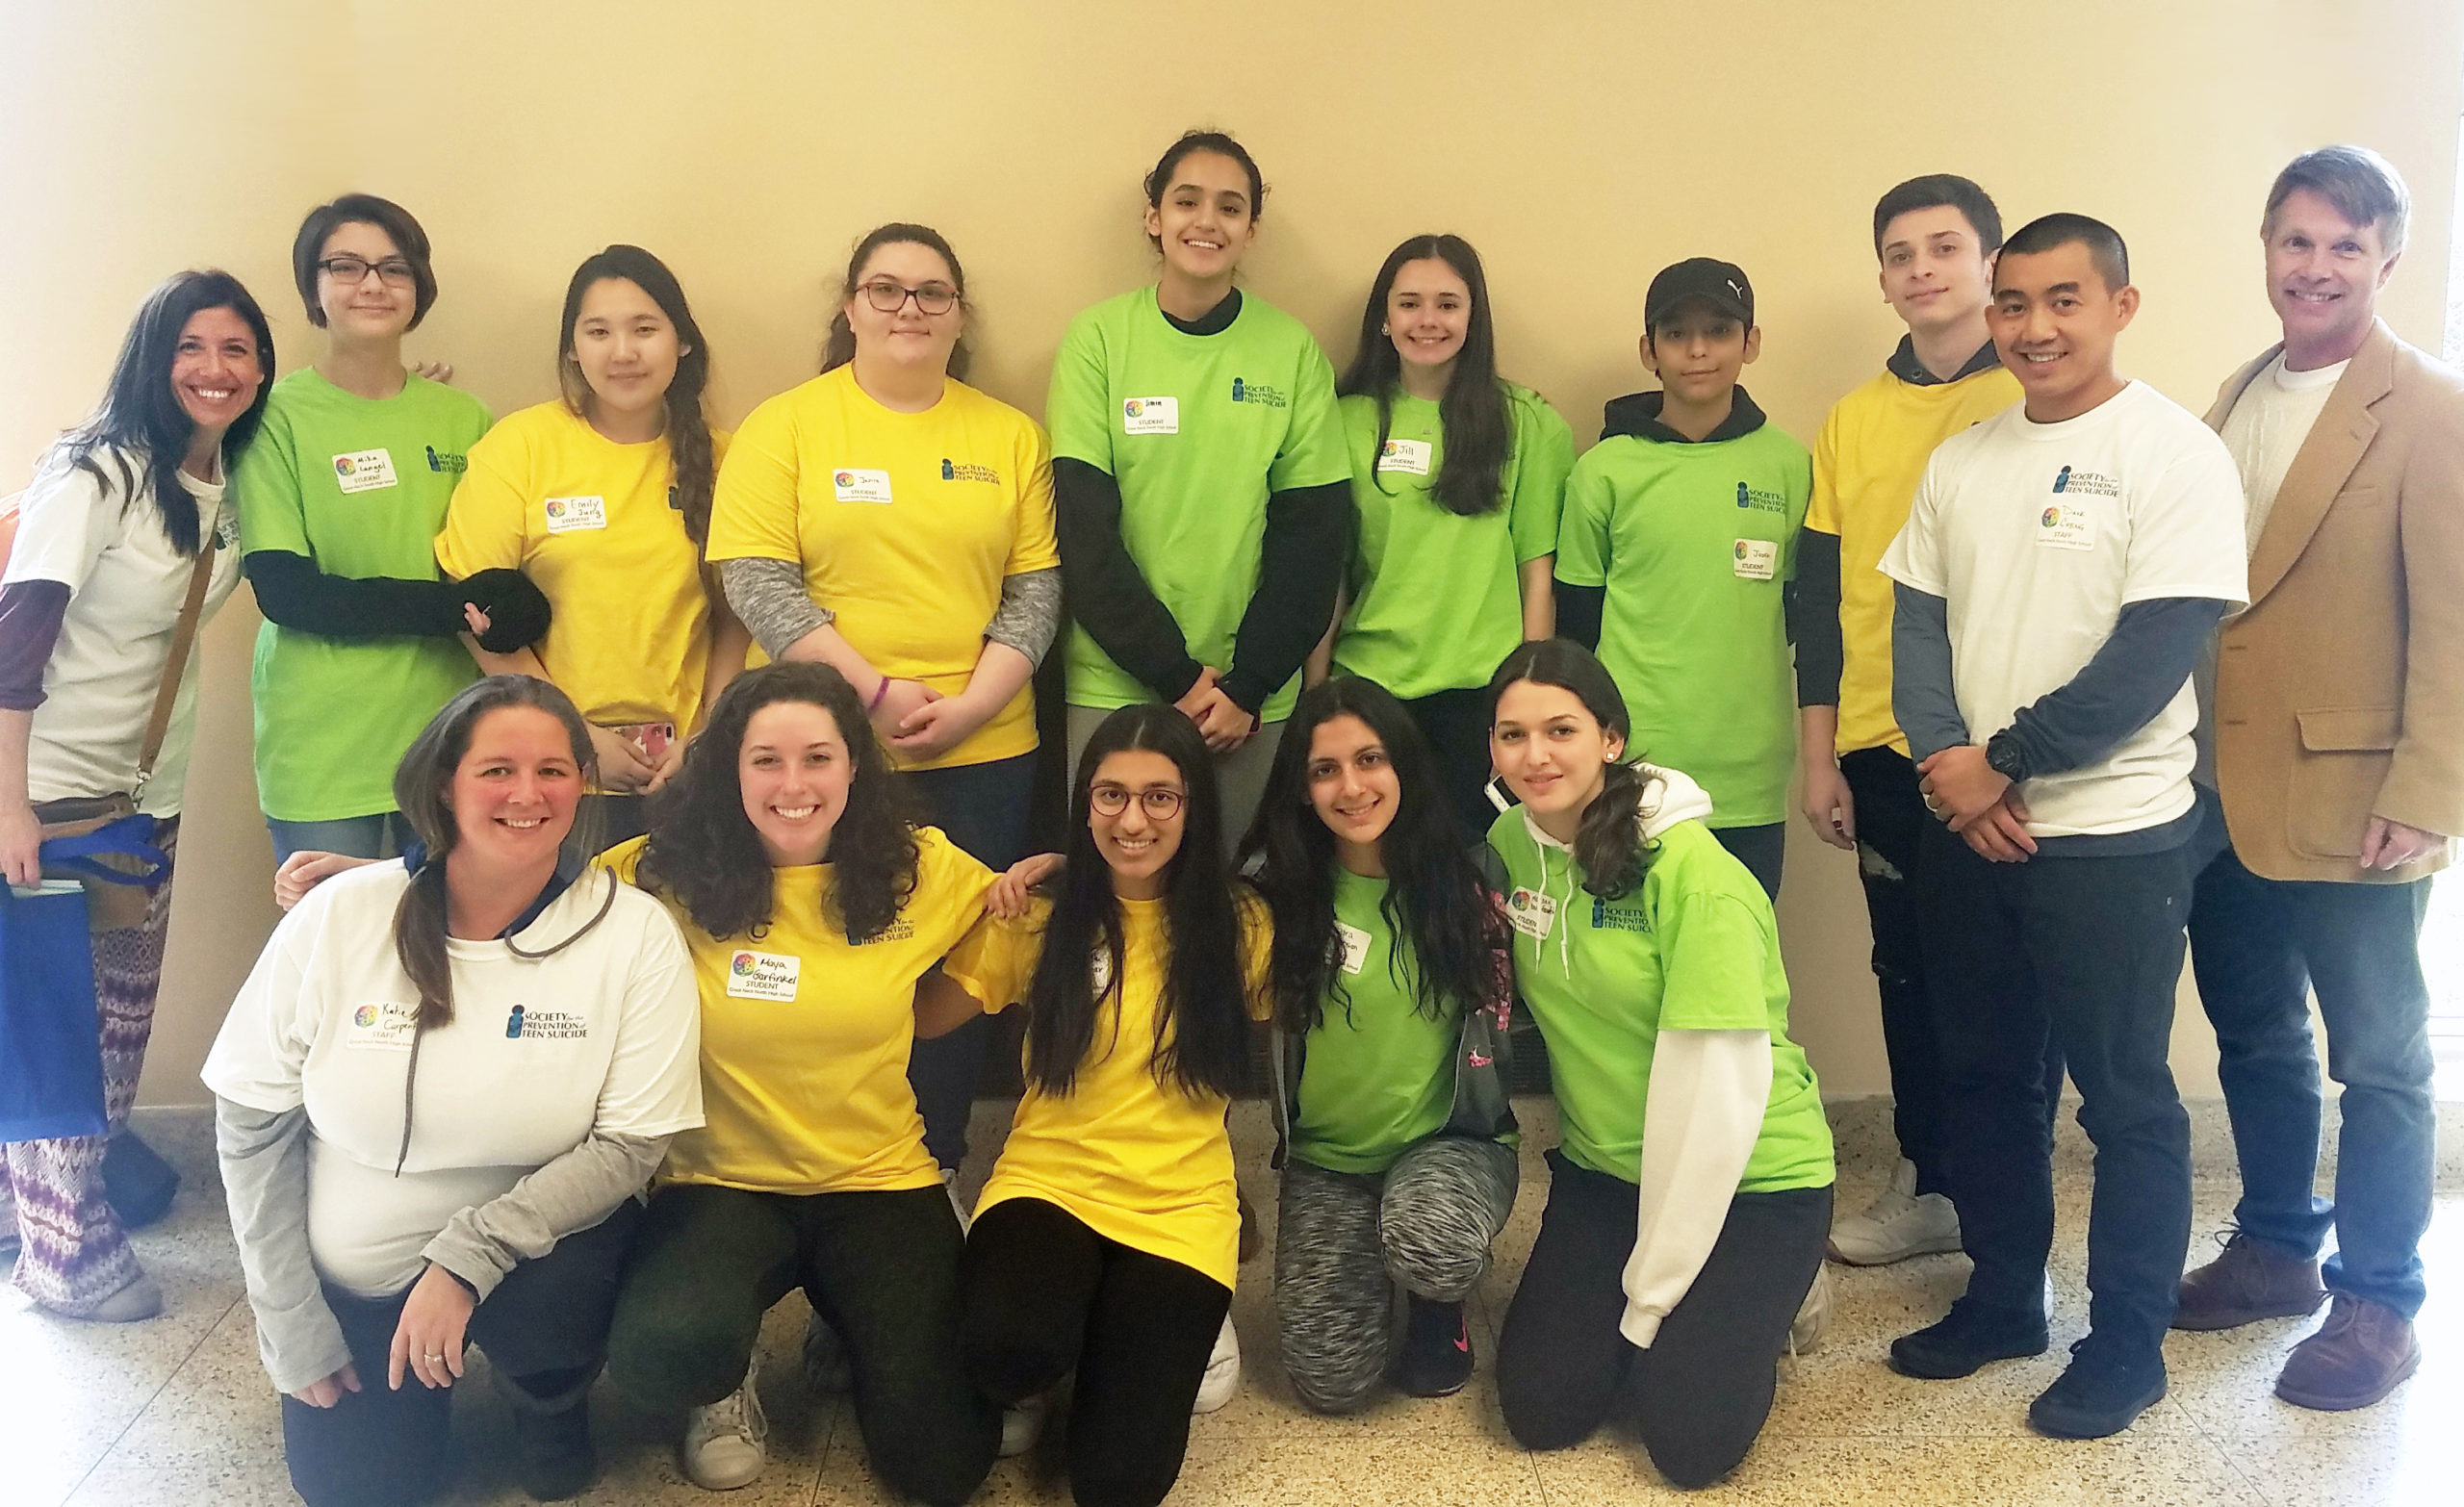 Students from the Great Neck high schools attended Nassau County's wellness summit. (Photo courtesy of the Great Neck Public Schools)